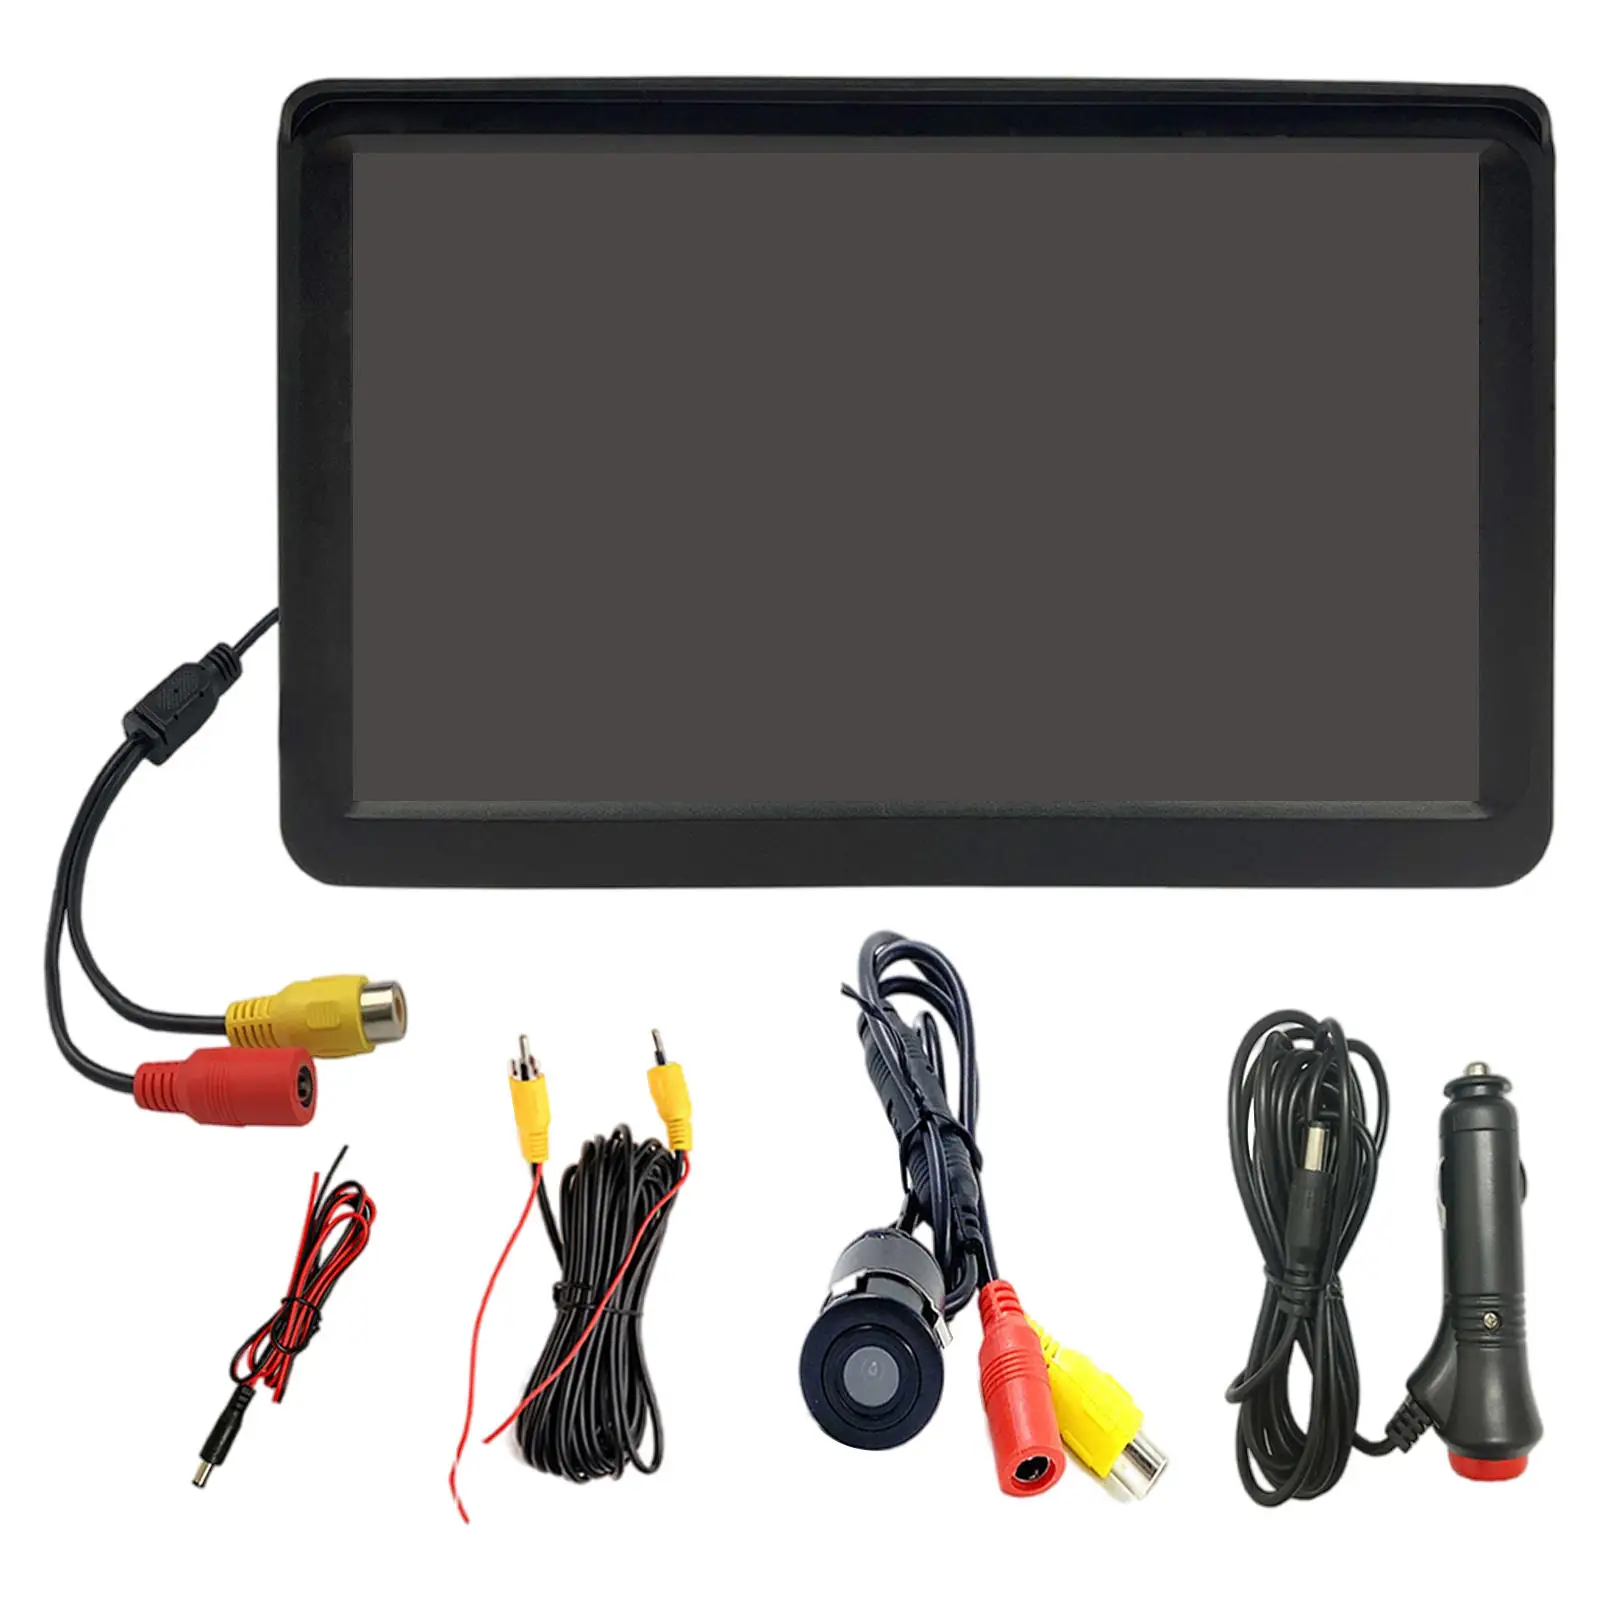 Rear Views Monitor Screen 7 inch Backup 1024x600 Resolution Easy Installation Screen Colorful Round Camera Kit Truck Parking SUV